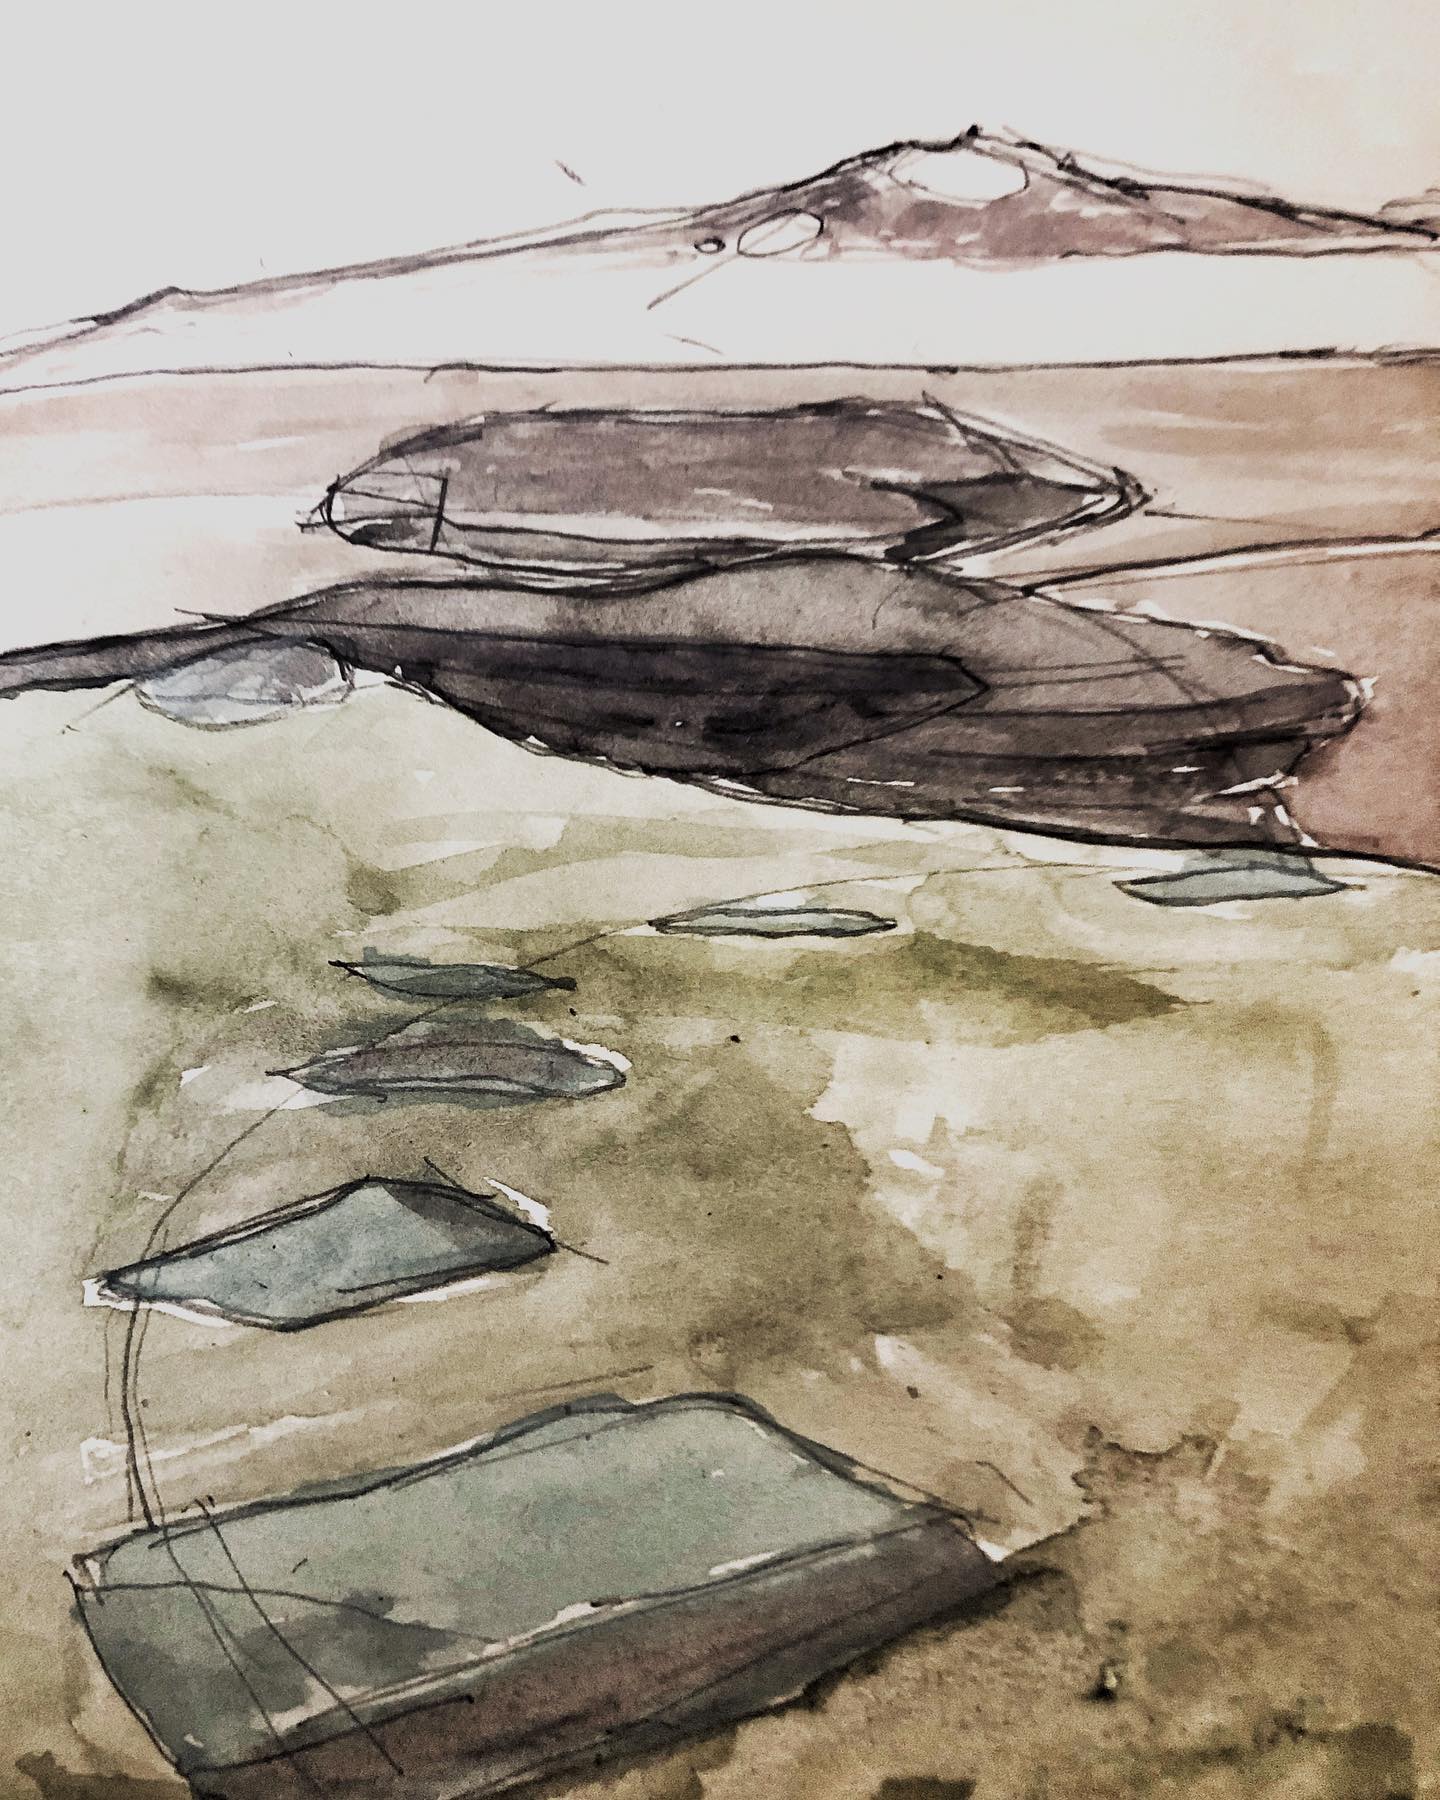 bodmin moor. a neolithic constellation: leskernick stone  circle. leskernik hill logan stone. rough tor. all within a mile of each other and intervisible.  an exploratory drawing ; pencil and watercolour. 

#bodminmoor, #neolithicconstellation, #neolithic, #leskernickstonecircle, #leskernikhill, #loganstone, #roughtor,  #intervisible, , #watercolour, #montagecity, 

@montagecity.com